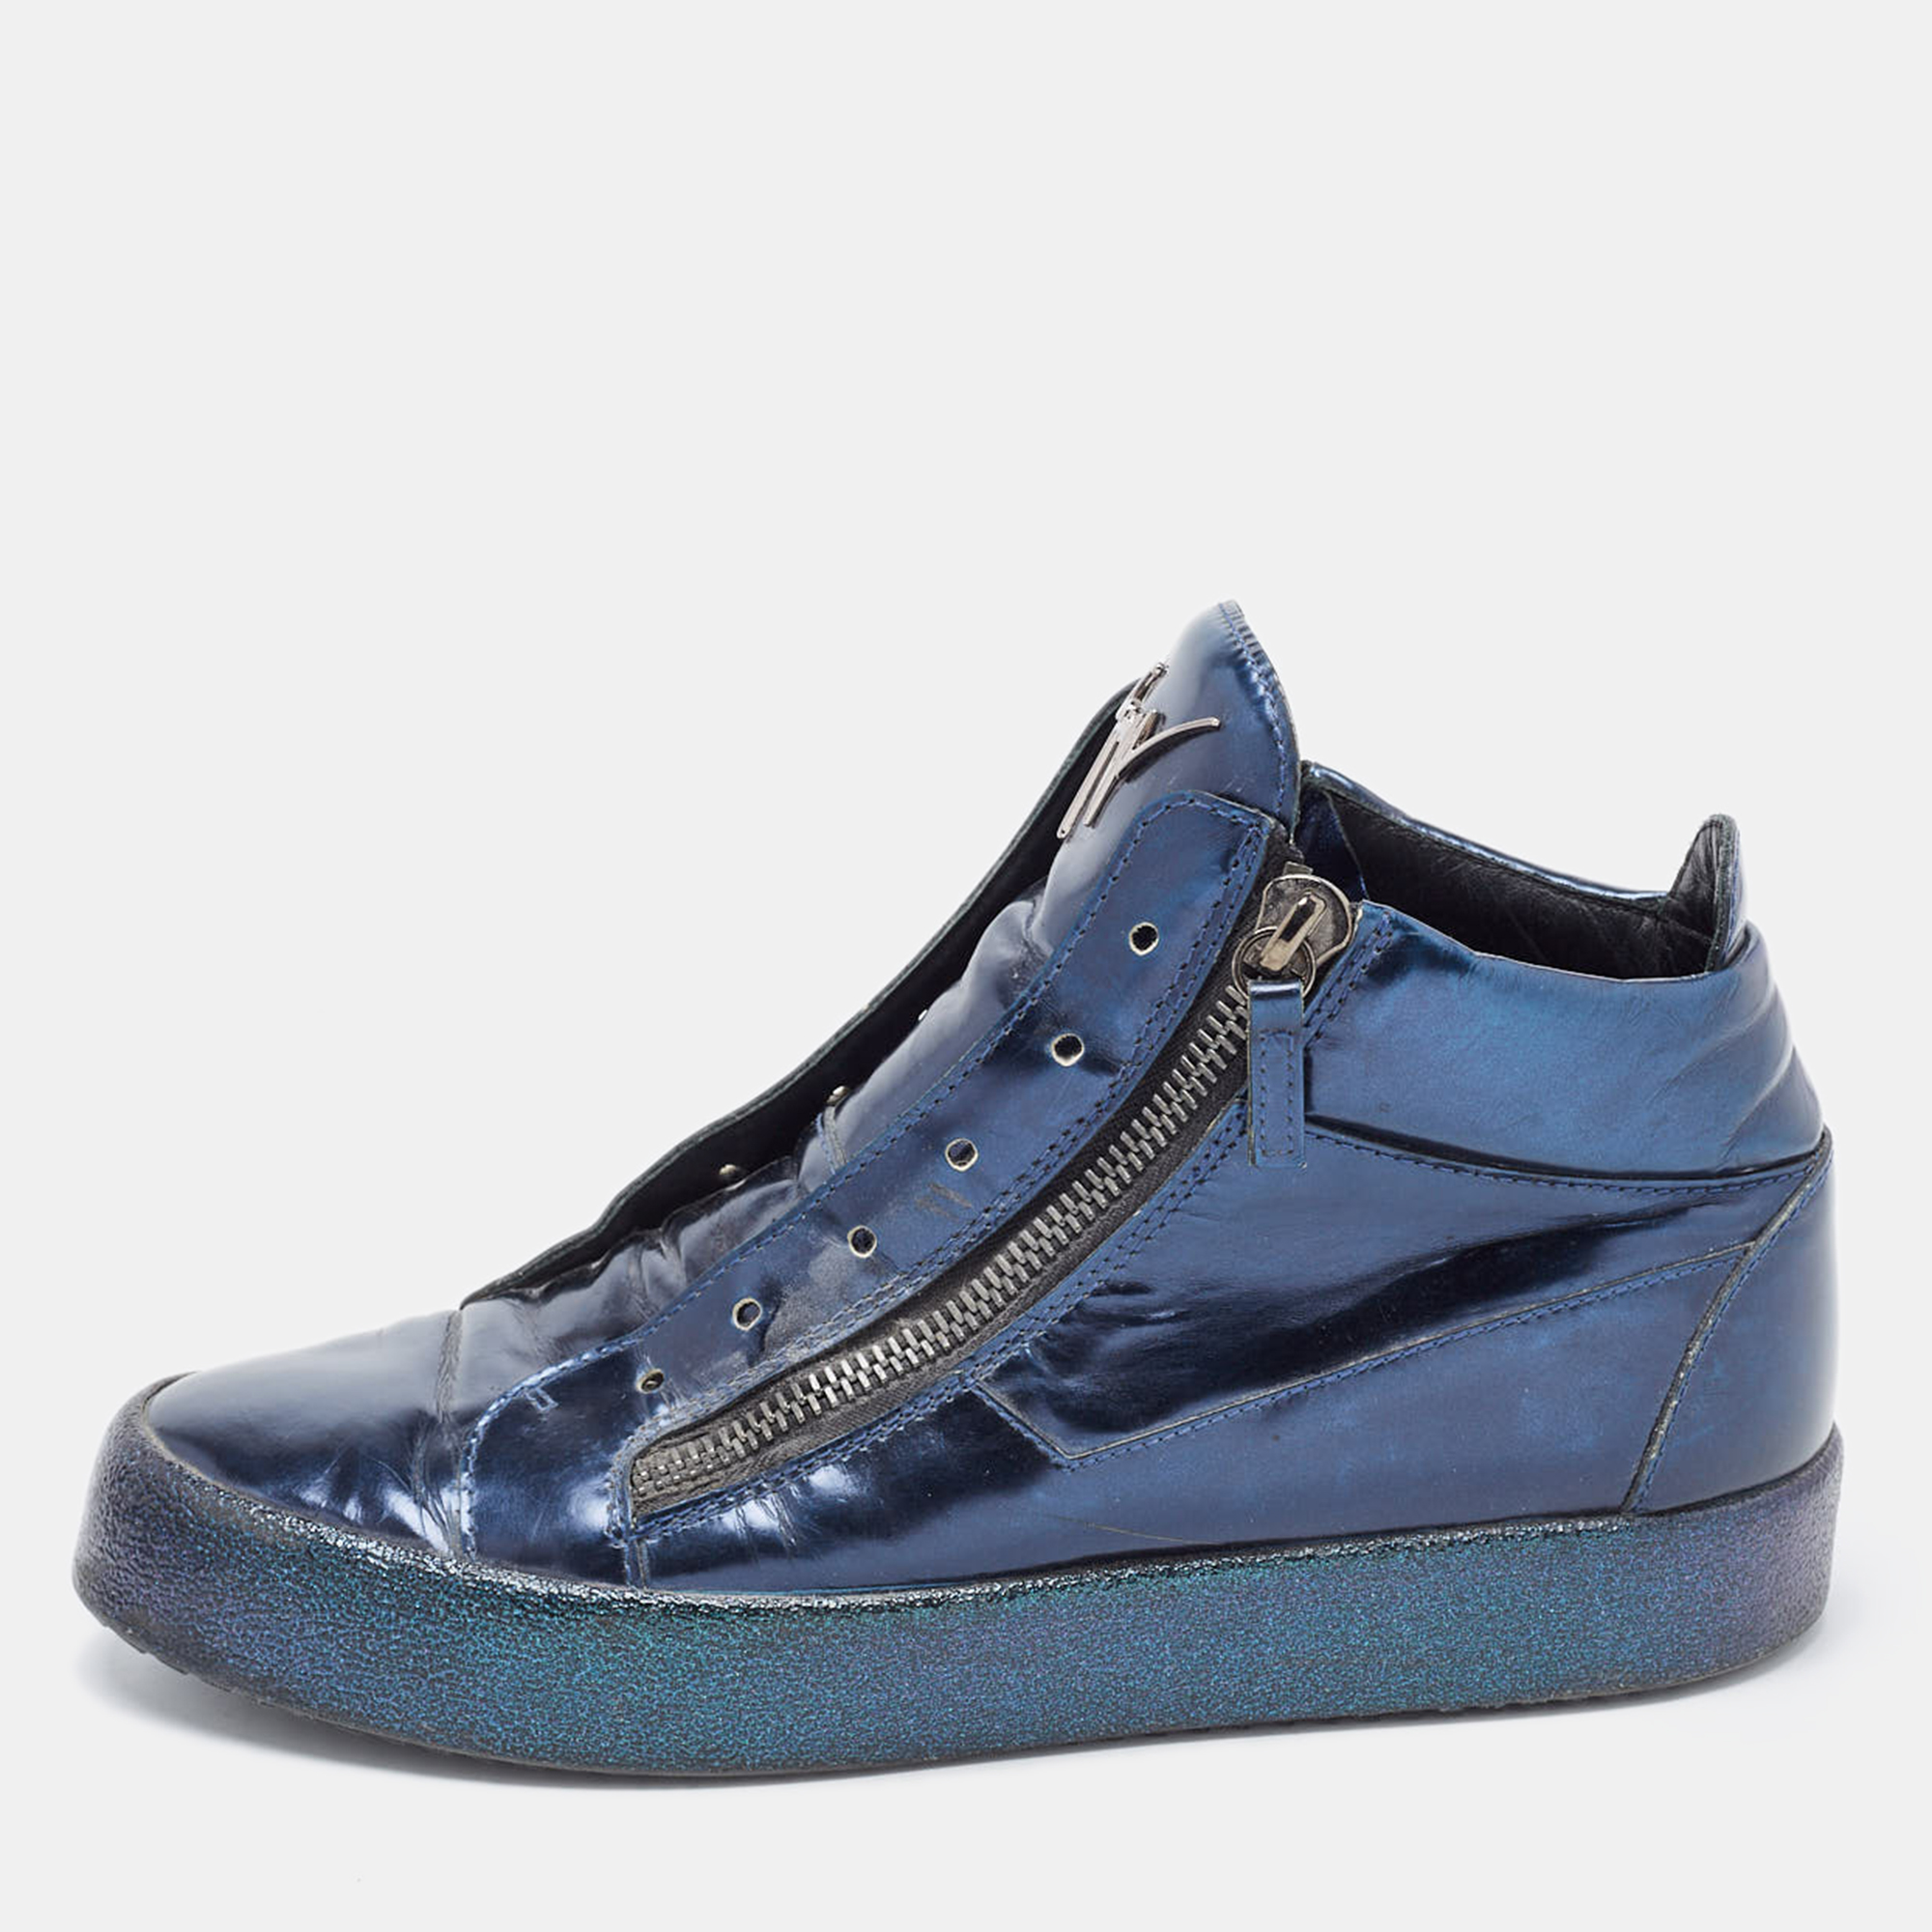 Pre-owned Giuseppe Zanotti Metallic Blue Leather High Top Trainers Size 42